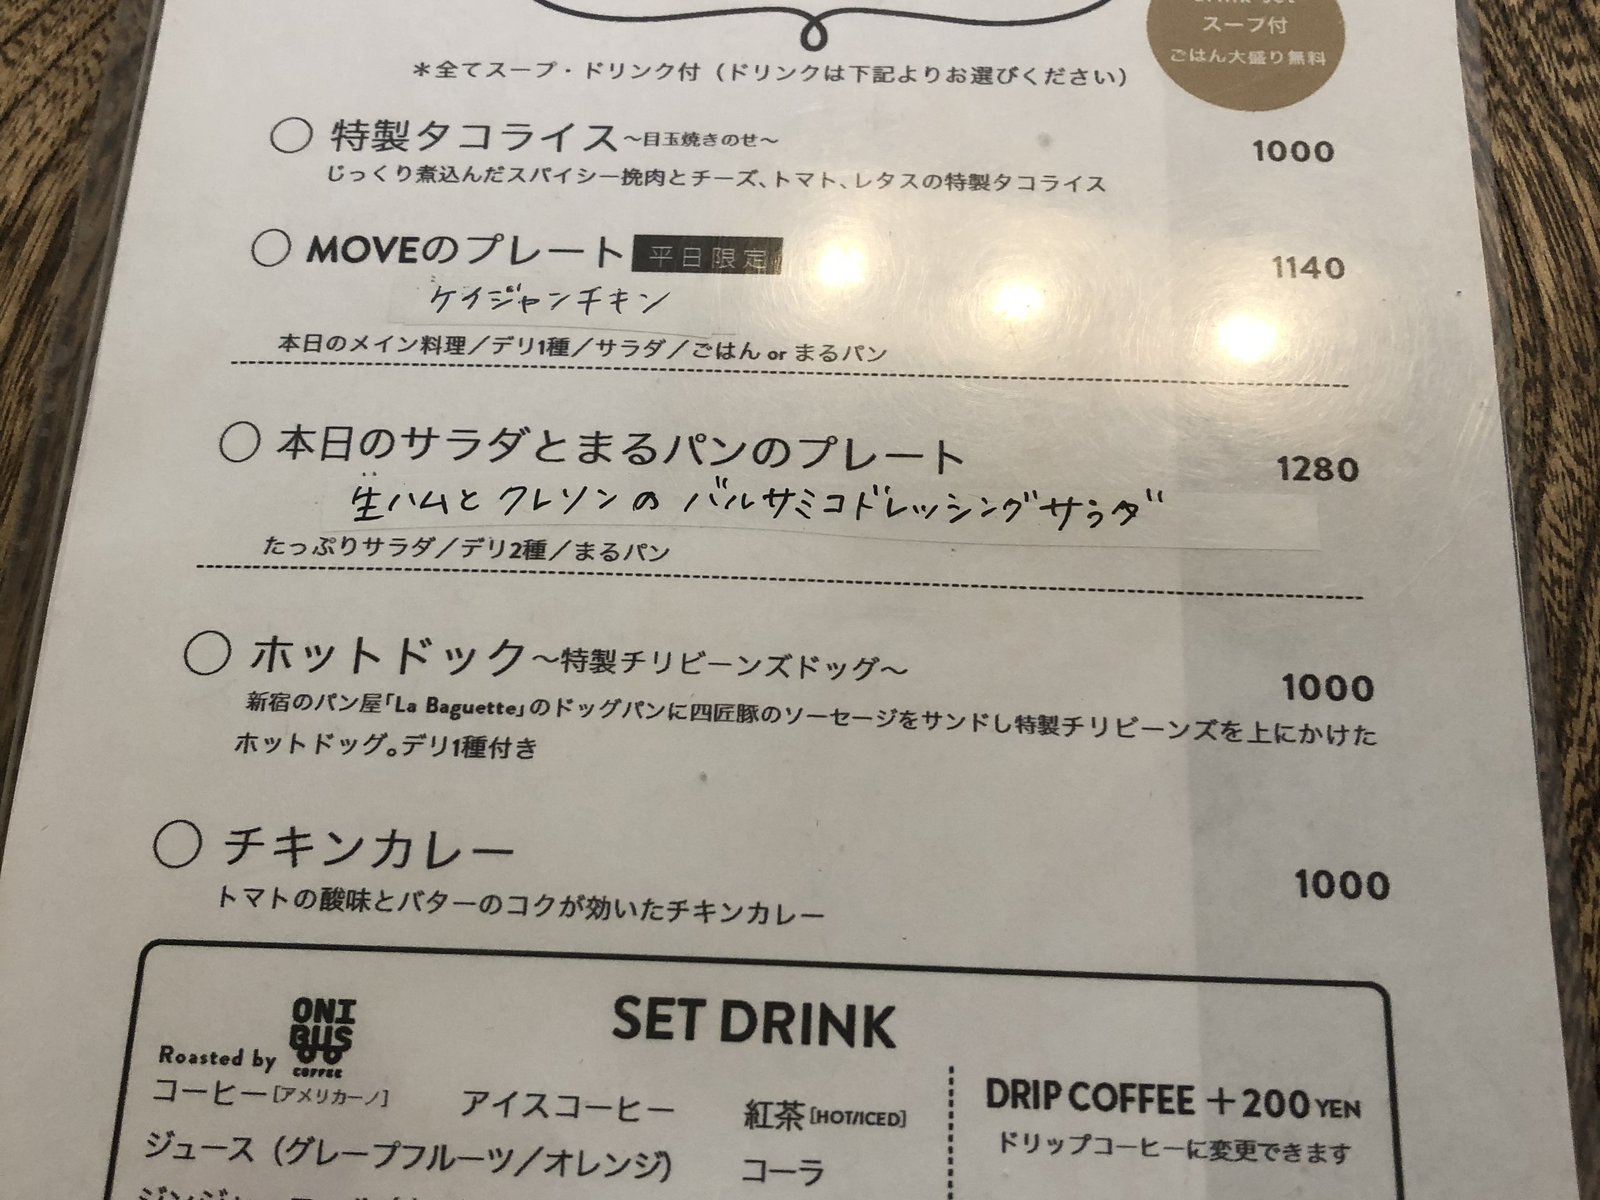 MOVE CAFE